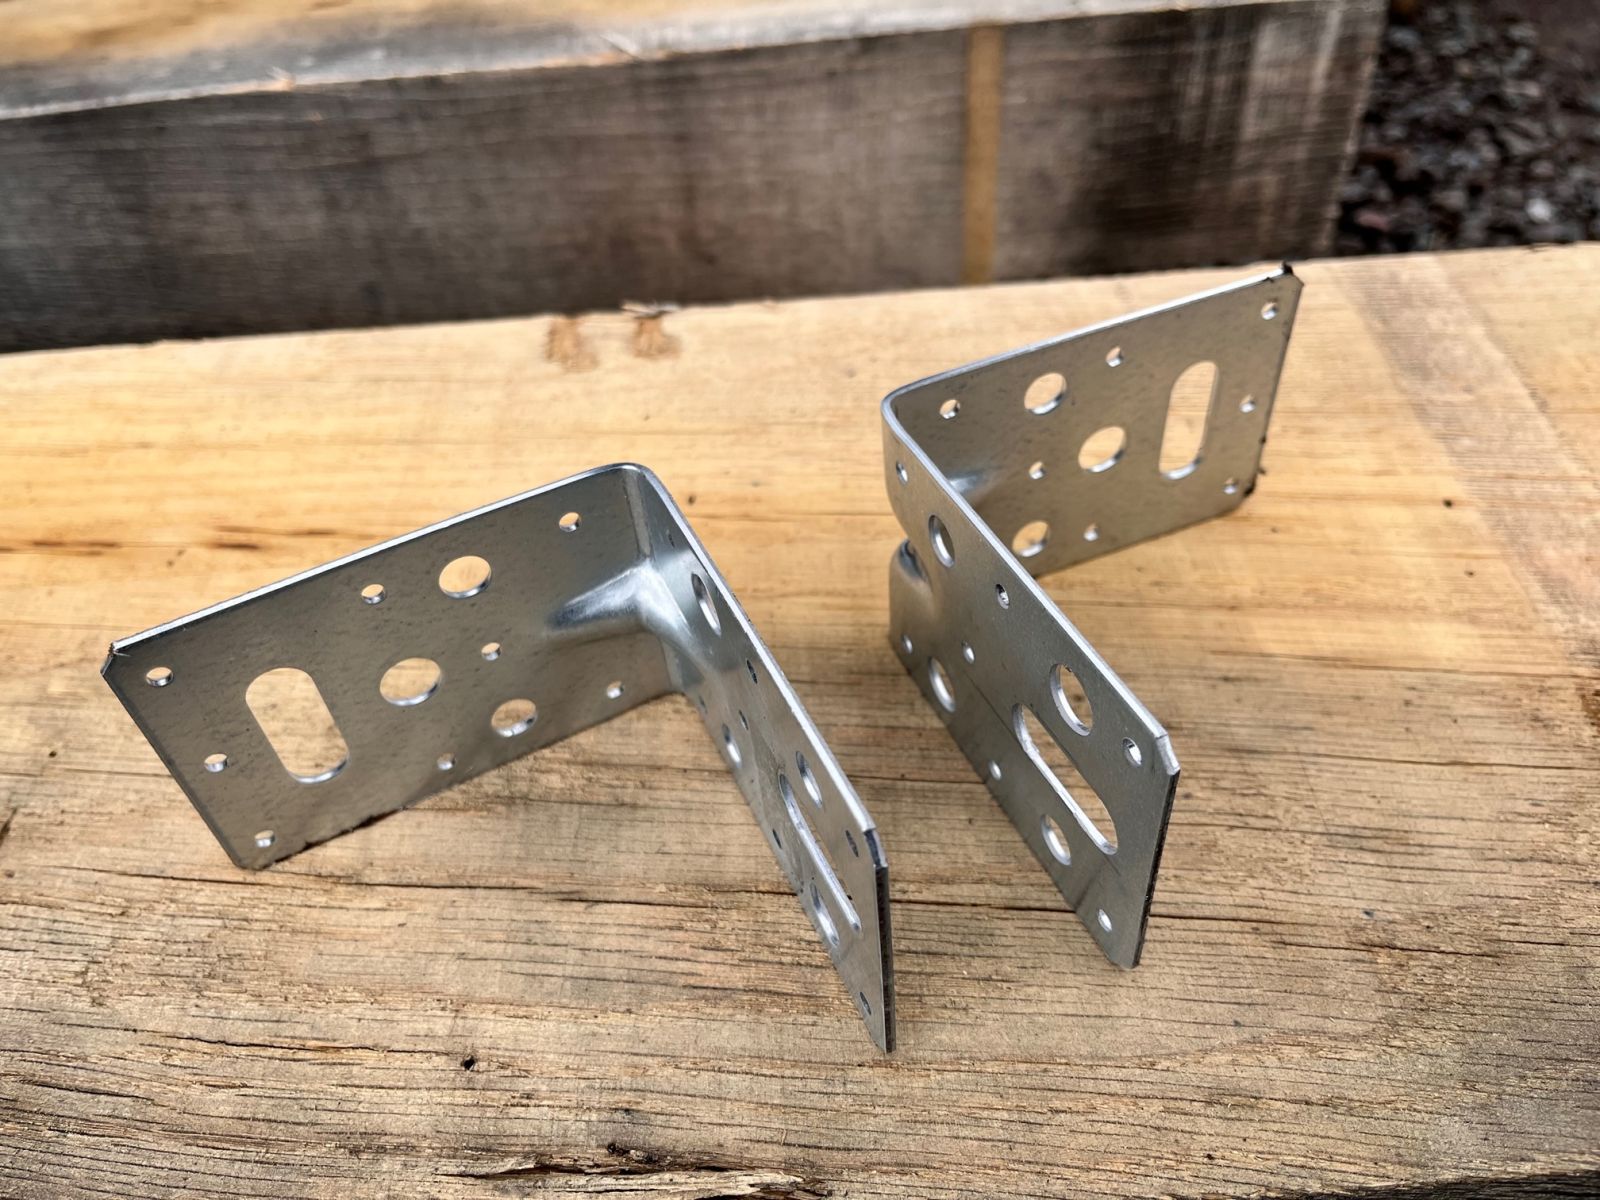 Steel angle brackets used to connect railway sleepers together at 90 degree corners